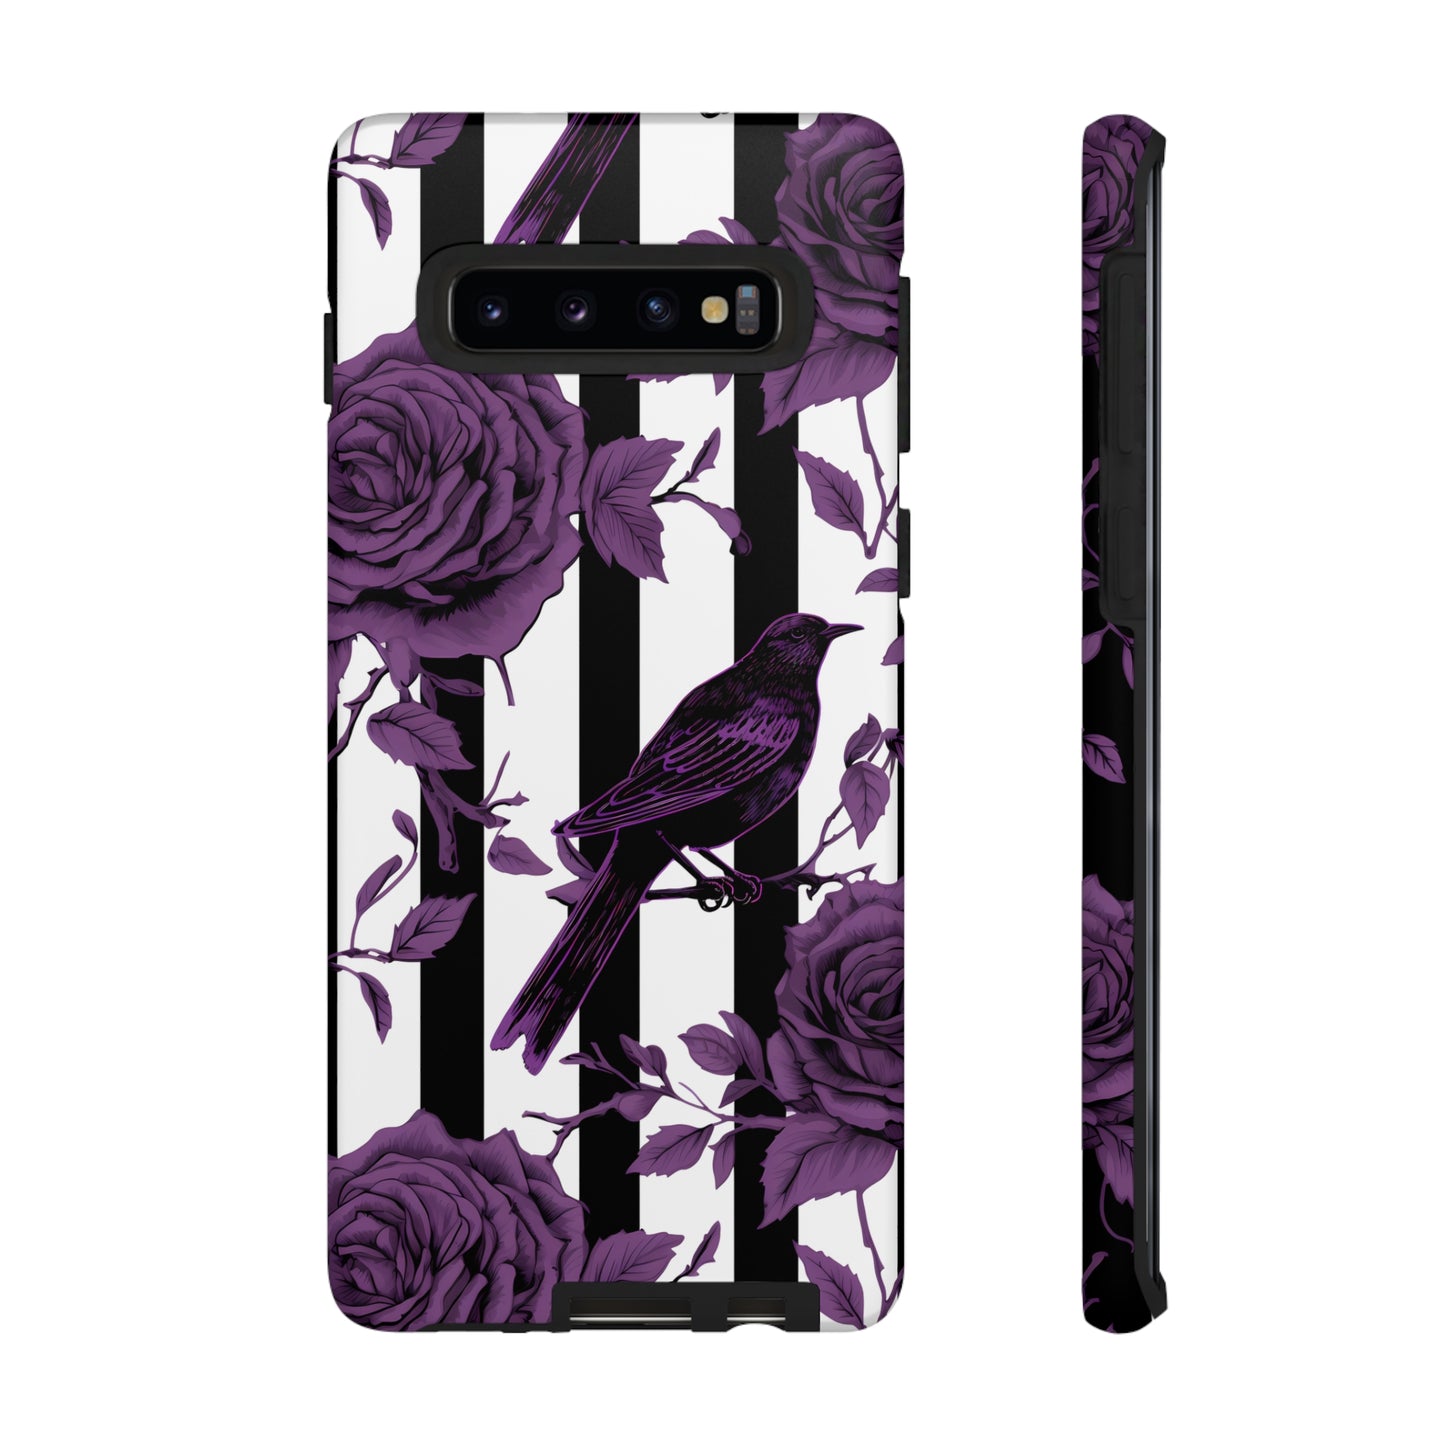 Striped Crows and Roses Tough Cases for iPhone Samsung Google PhonesPhone CaseVTZdesignsSamsung Galaxy S10MatteAccessoriescrowsGlossy